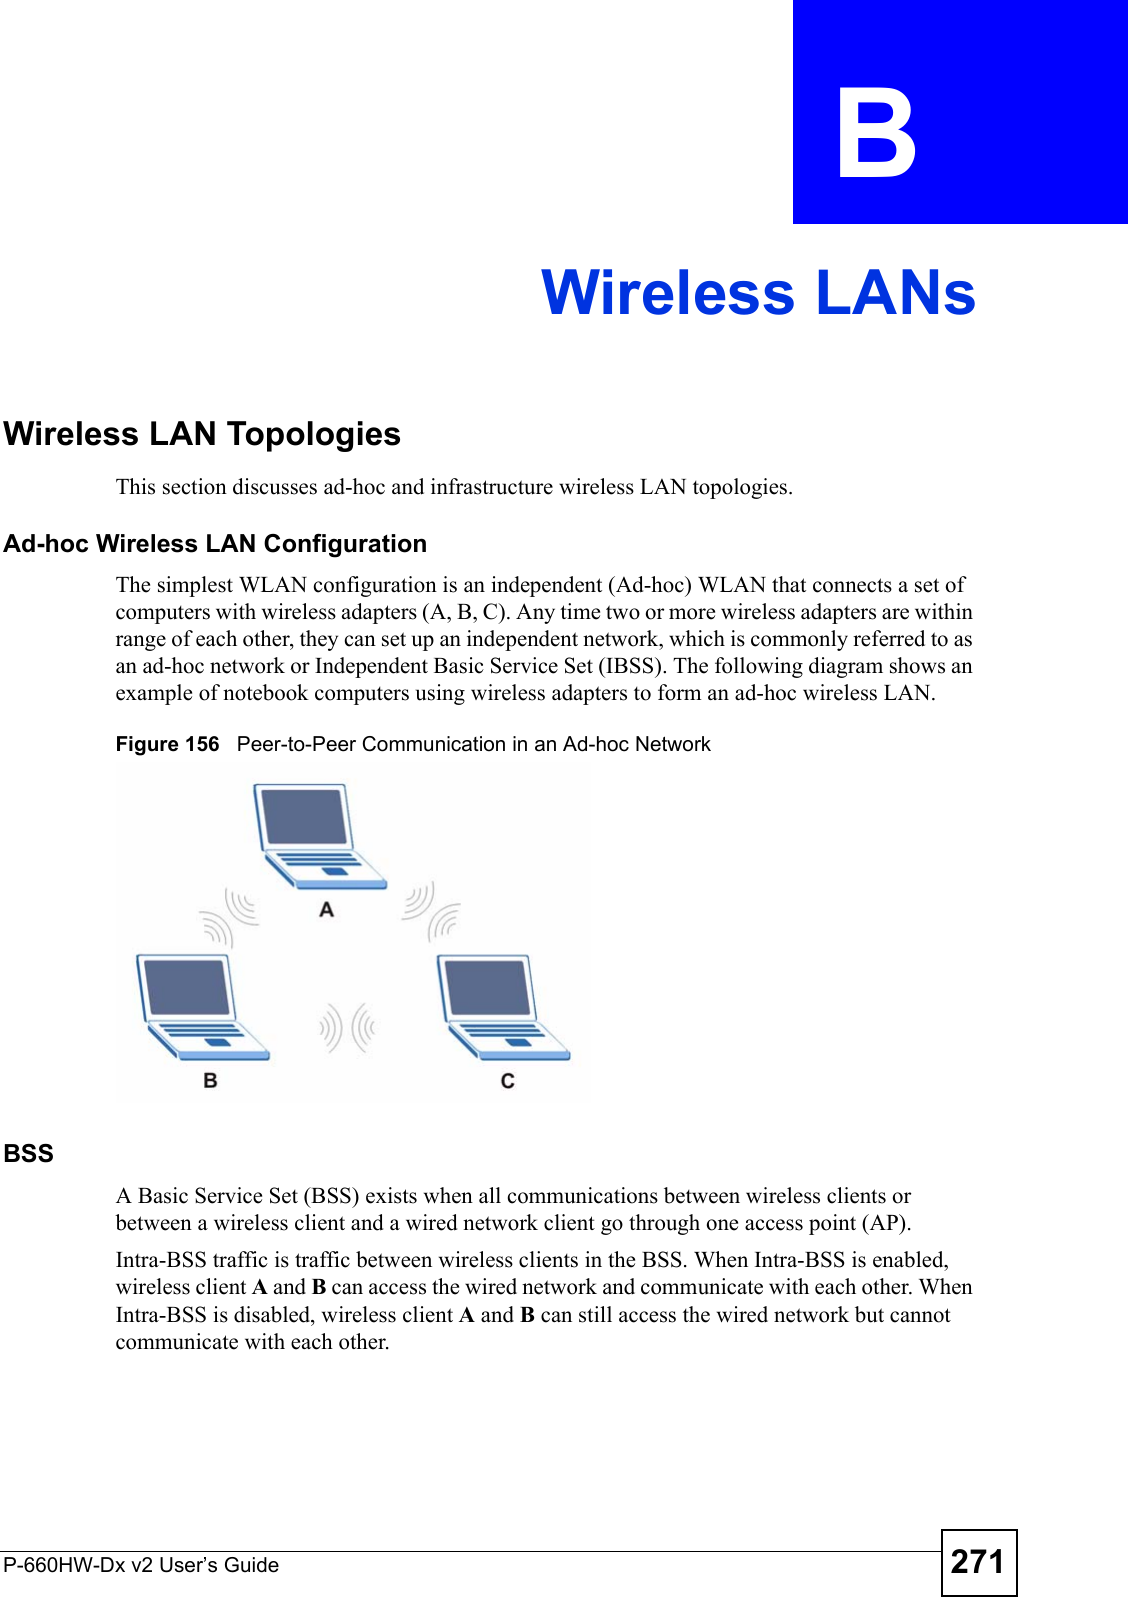 P-660HW-Dx v2 User’s Guide 271APPENDIX  B Wireless LANsWireless LAN TopologiesThis section discusses ad-hoc and infrastructure wireless LAN topologies.Ad-hoc Wireless LAN ConfigurationThe simplest WLAN configuration is an independent (Ad-hoc) WLAN that connects a set of computers with wireless adapters (A, B, C). Any time two or more wireless adapters are within range of each other, they can set up an independent network, which is commonly referred to as an ad-hoc network or Independent Basic Service Set (IBSS). The following diagram shows an example of notebook computers using wireless adapters to form an ad-hoc wireless LAN. Figure 156   Peer-to-Peer Communication in an Ad-hoc NetworkBSSA Basic Service Set (BSS) exists when all communications between wireless clients or between a wireless client and a wired network client go through one access point (AP). Intra-BSS traffic is traffic between wireless clients in the BSS. When Intra-BSS is enabled, wireless client A and B can access the wired network and communicate with each other. When Intra-BSS is disabled, wireless client A and B can still access the wired network but cannot communicate with each other.